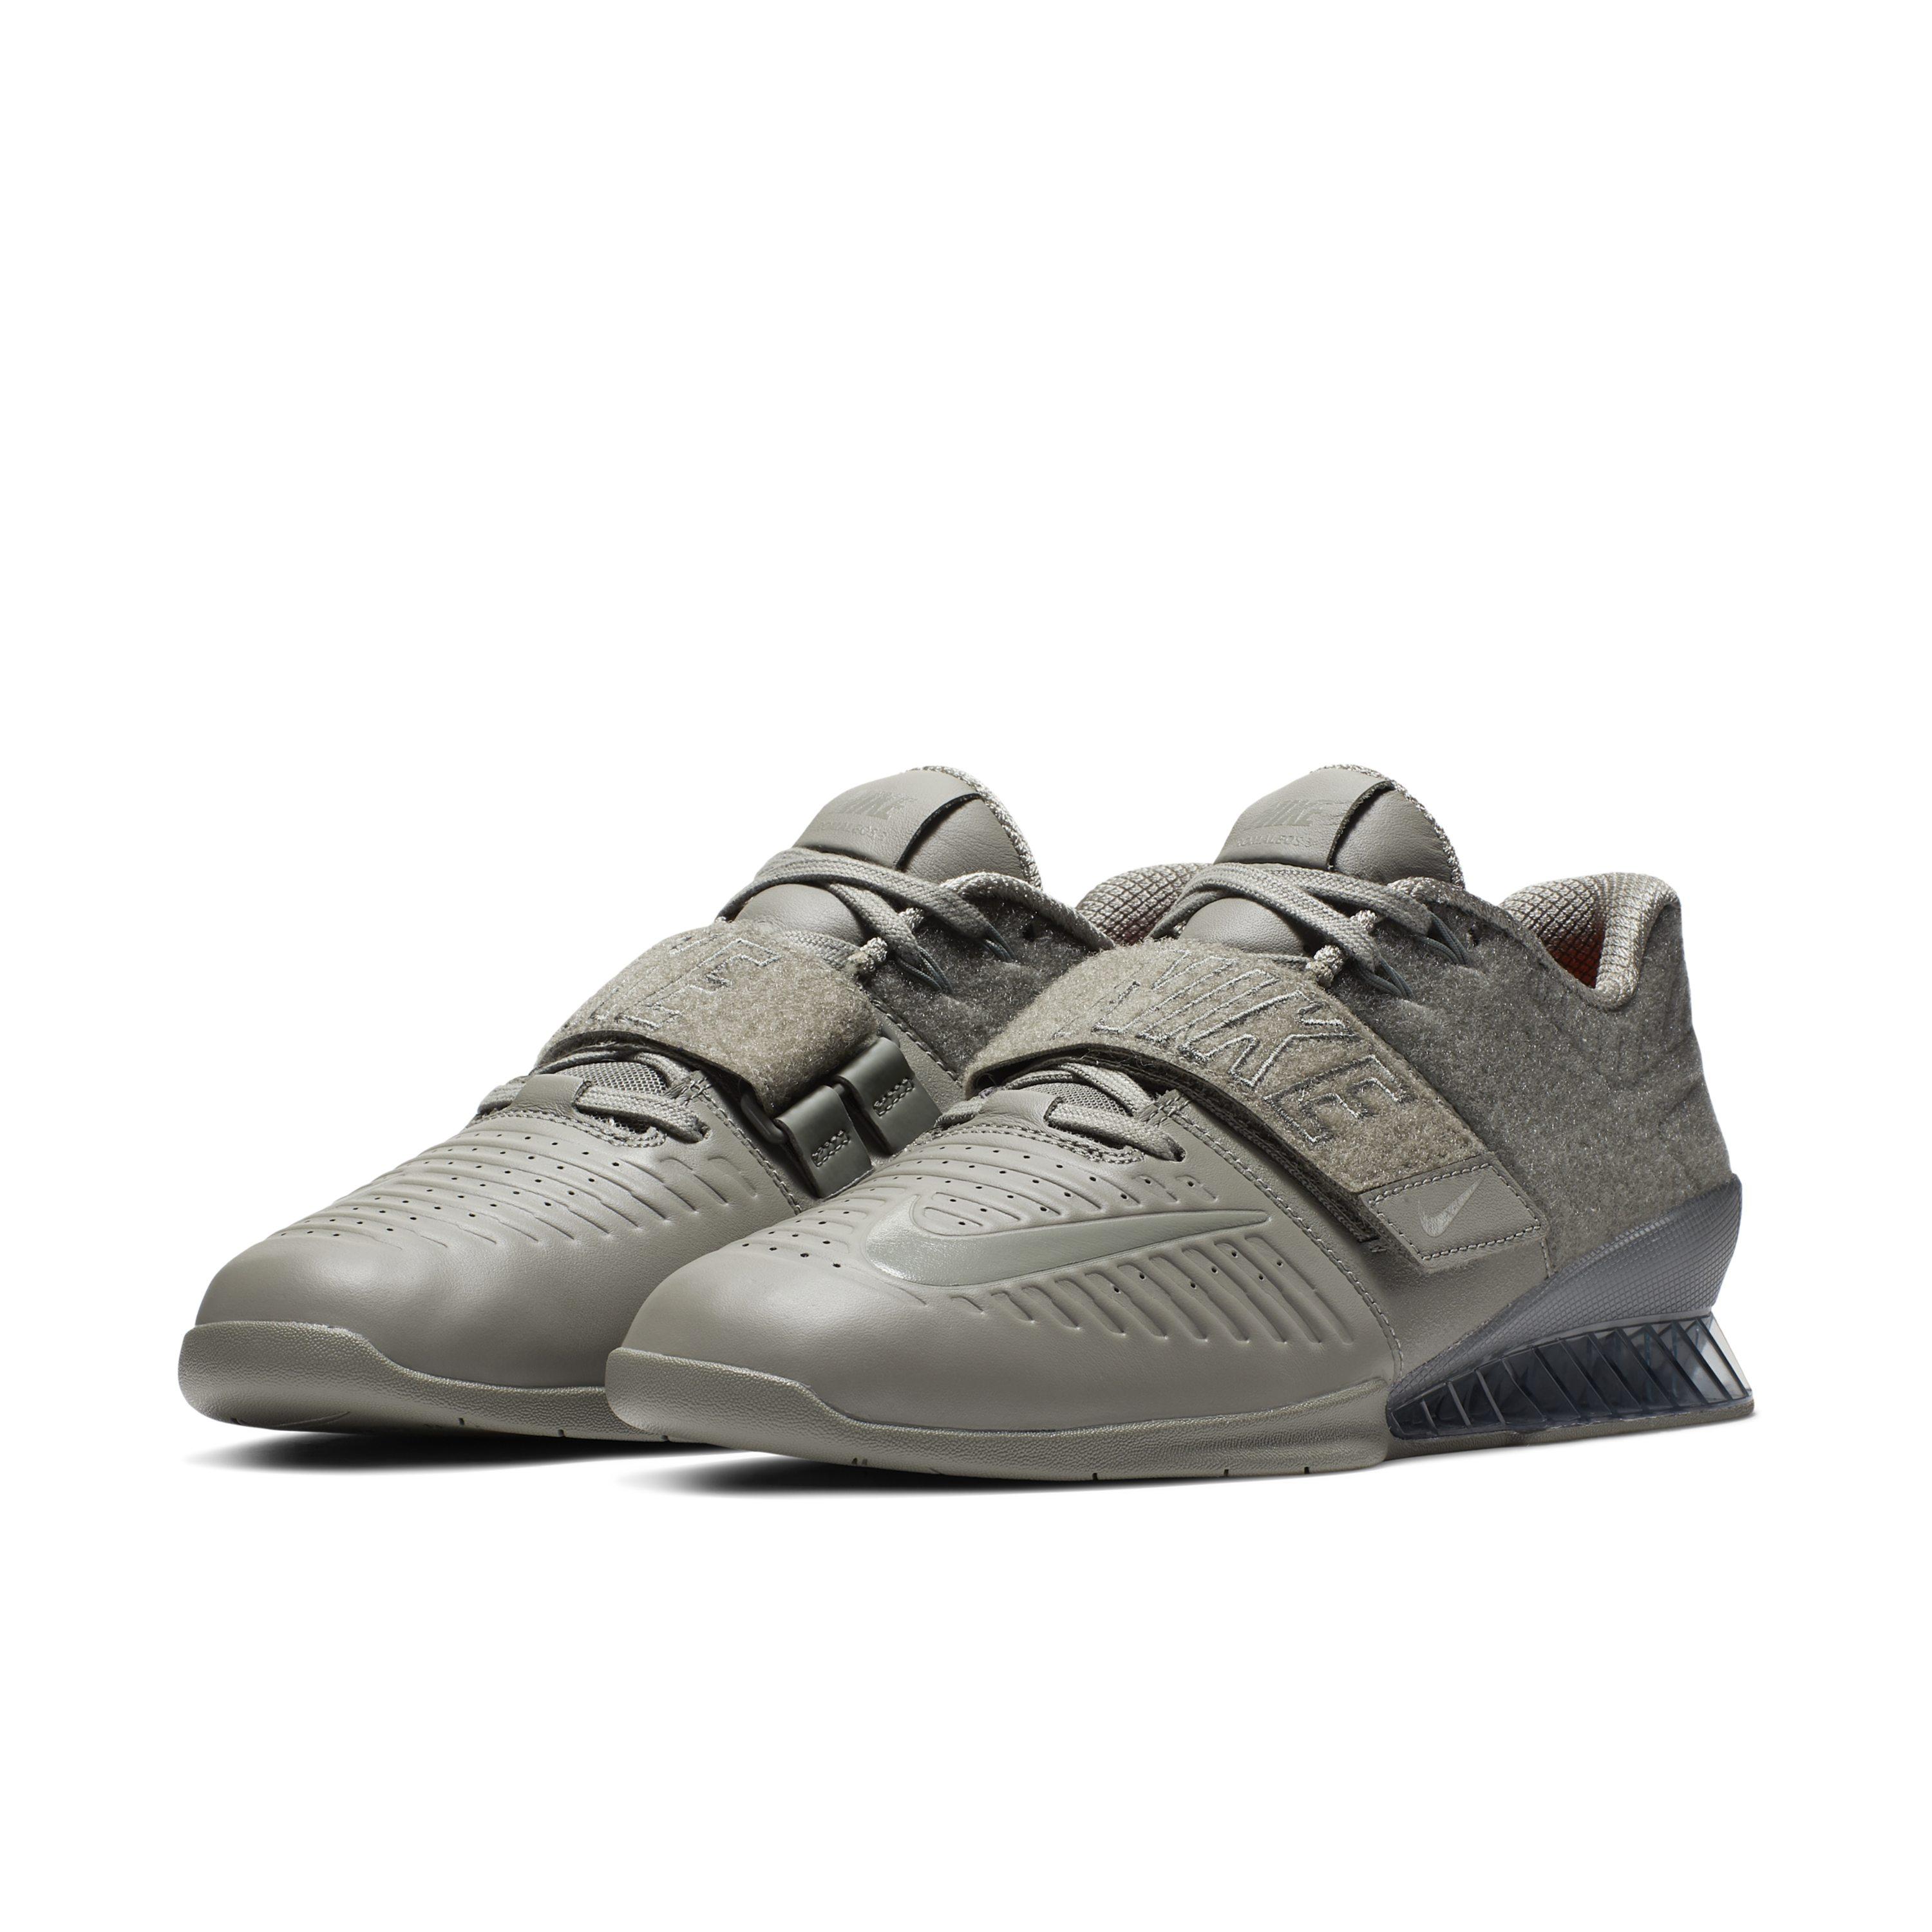 Nike Romaleos 3 Xd Patch Training Shoe in Grey (Grey) for Men - Lyst